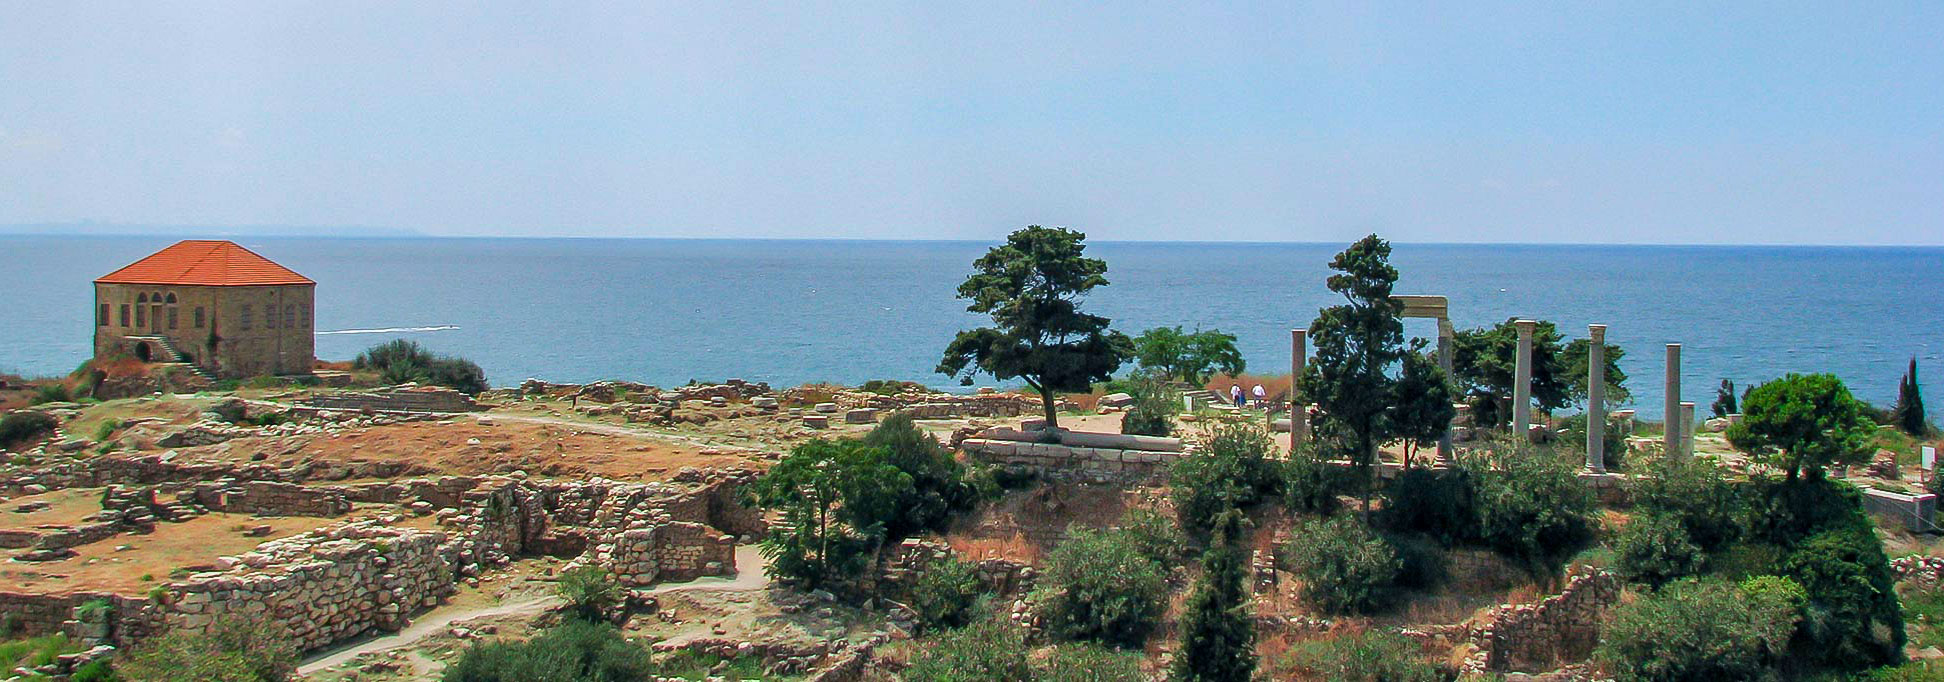 Ruins and a traditional Lebanese house at Byblos